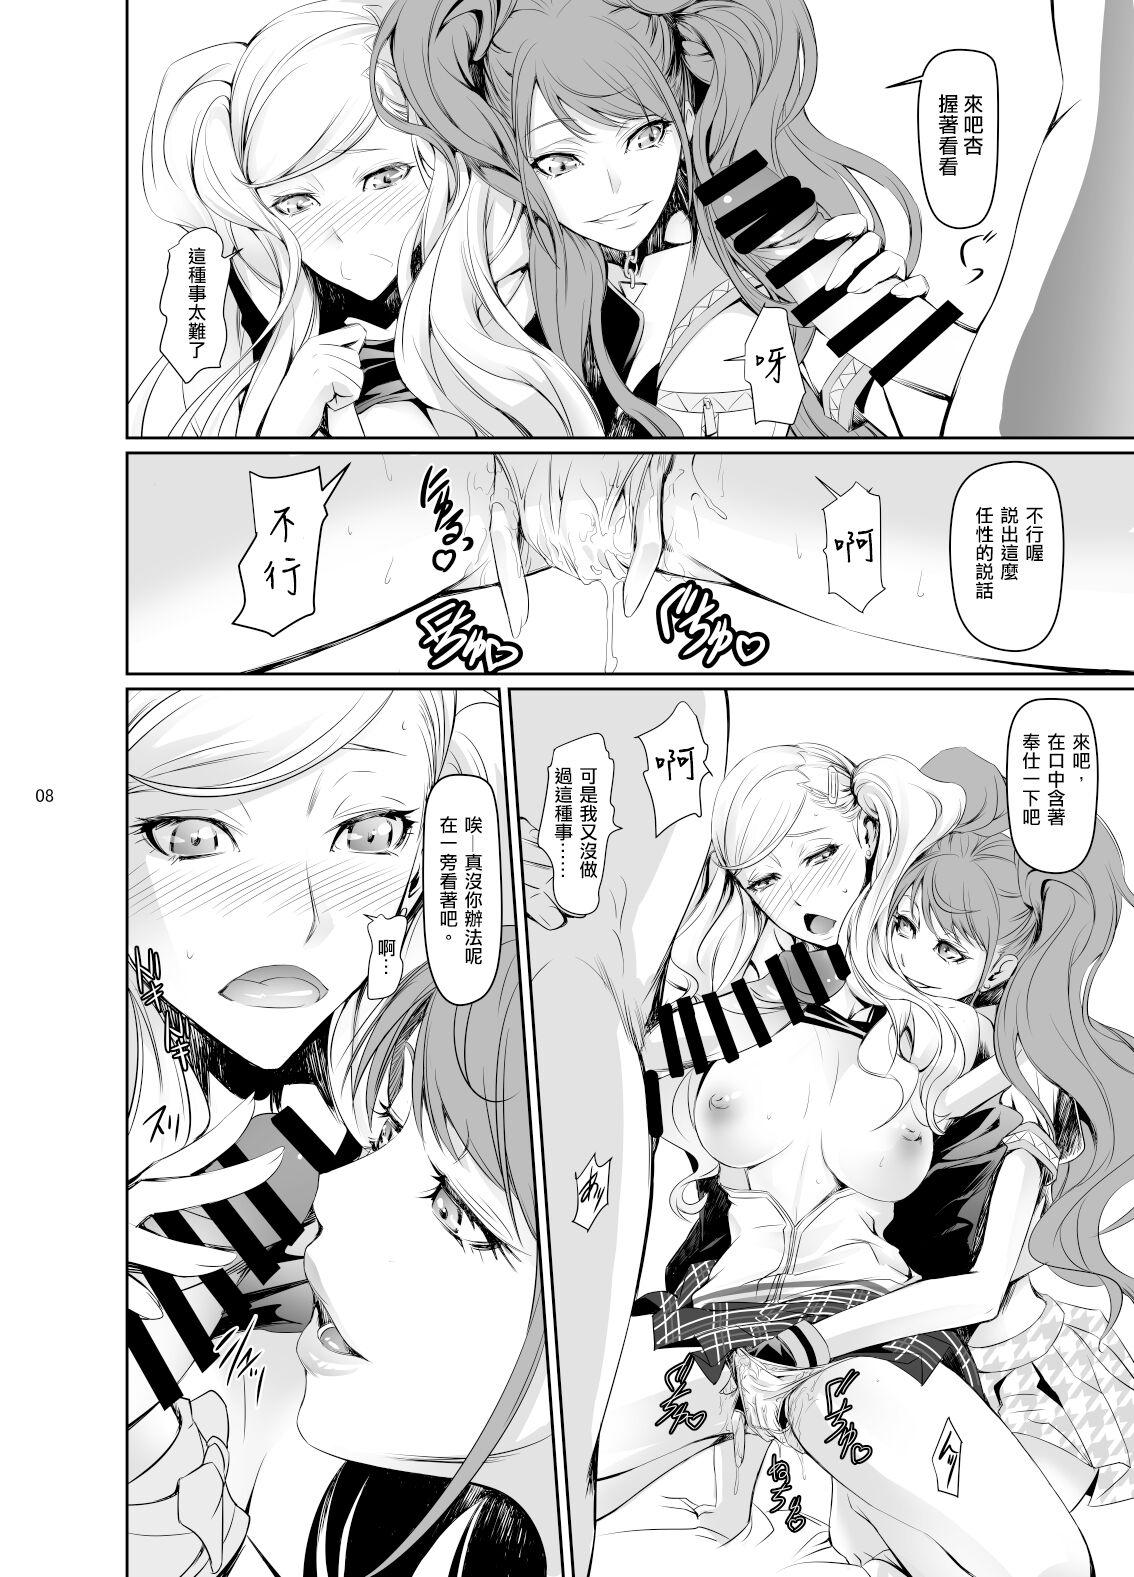 Spanish Rise Anne - Persona 4 Persona 5 Hot Whores - Page 9